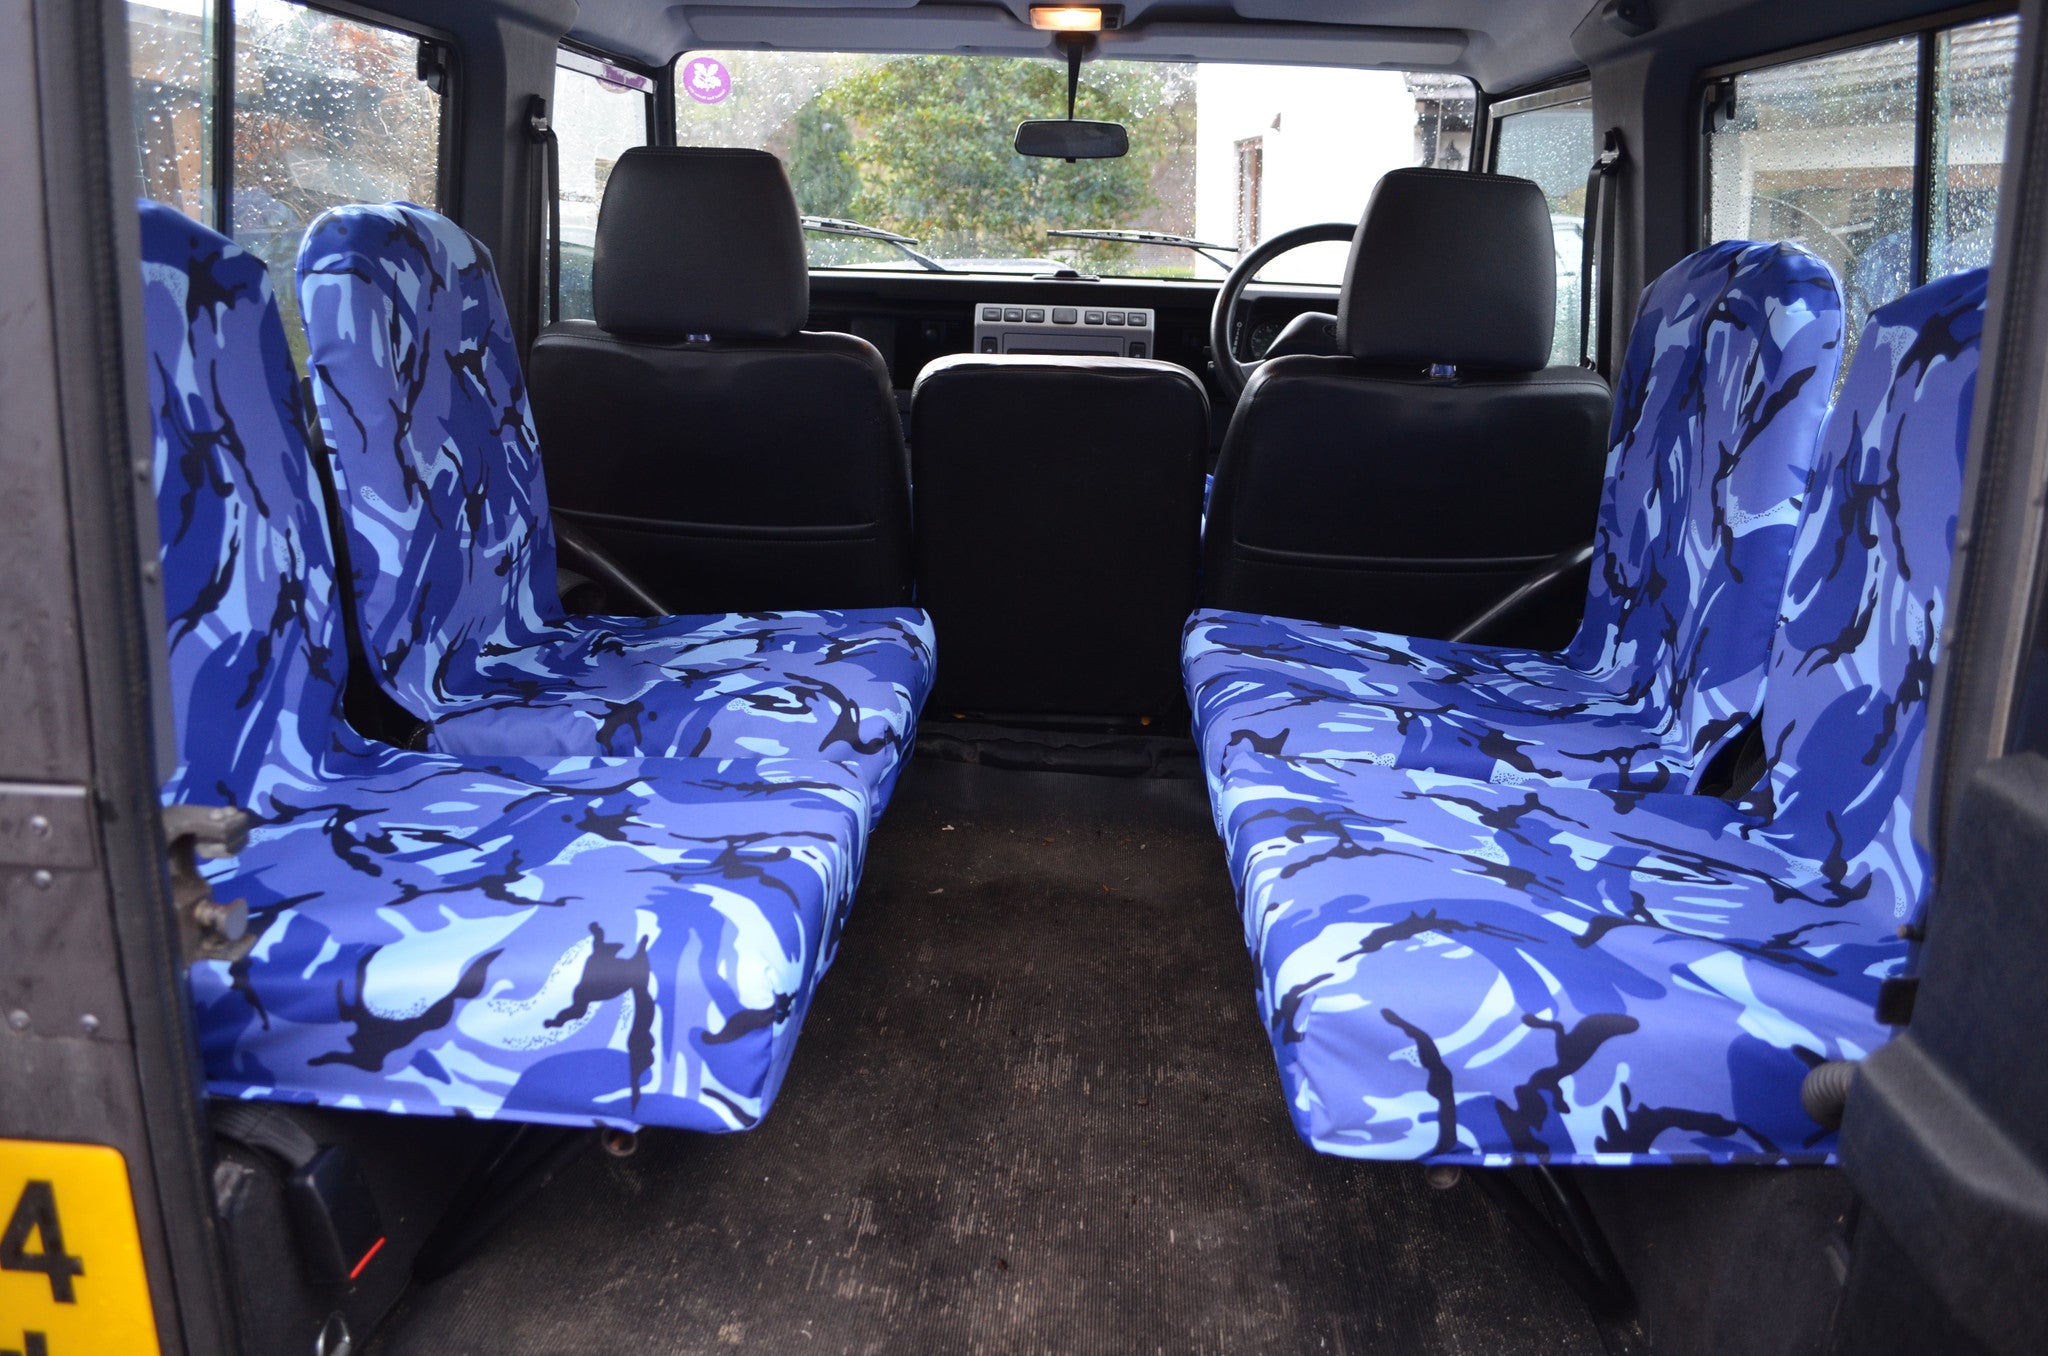 Land Rover Defender 1983 - 2007 Rear Seat Covers Set of 4 Dicky Seats / Blue Camouflage Turtle Covers Ltd